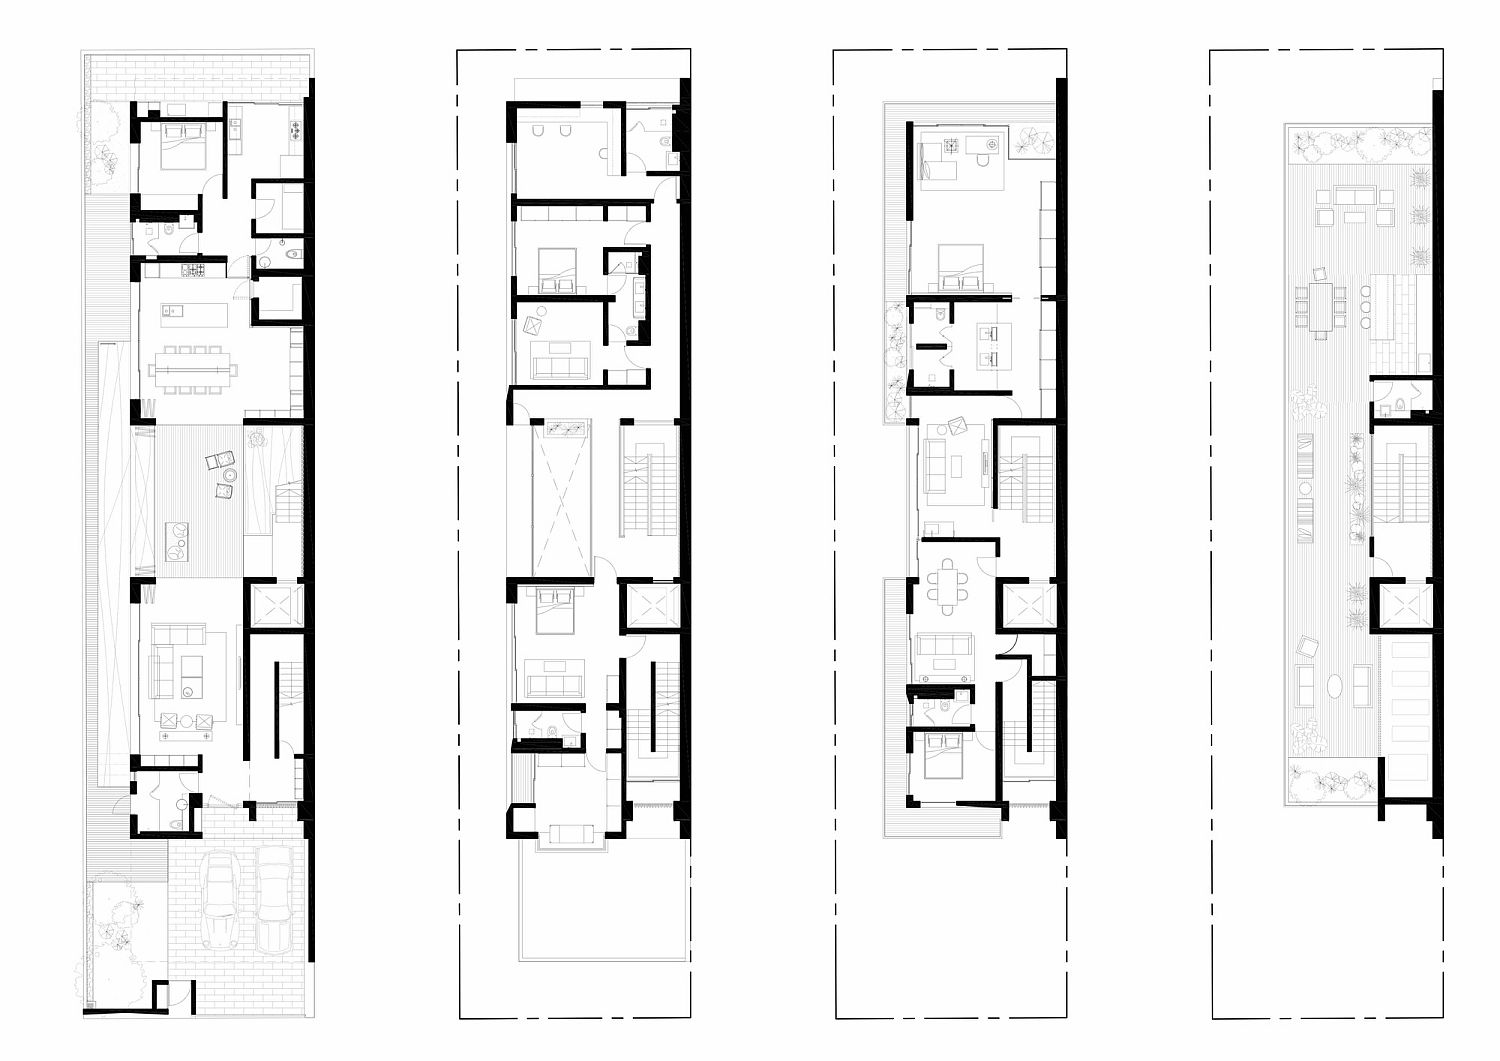 Floor plan of 22 Toh Yi Road contemporary house in Singapore